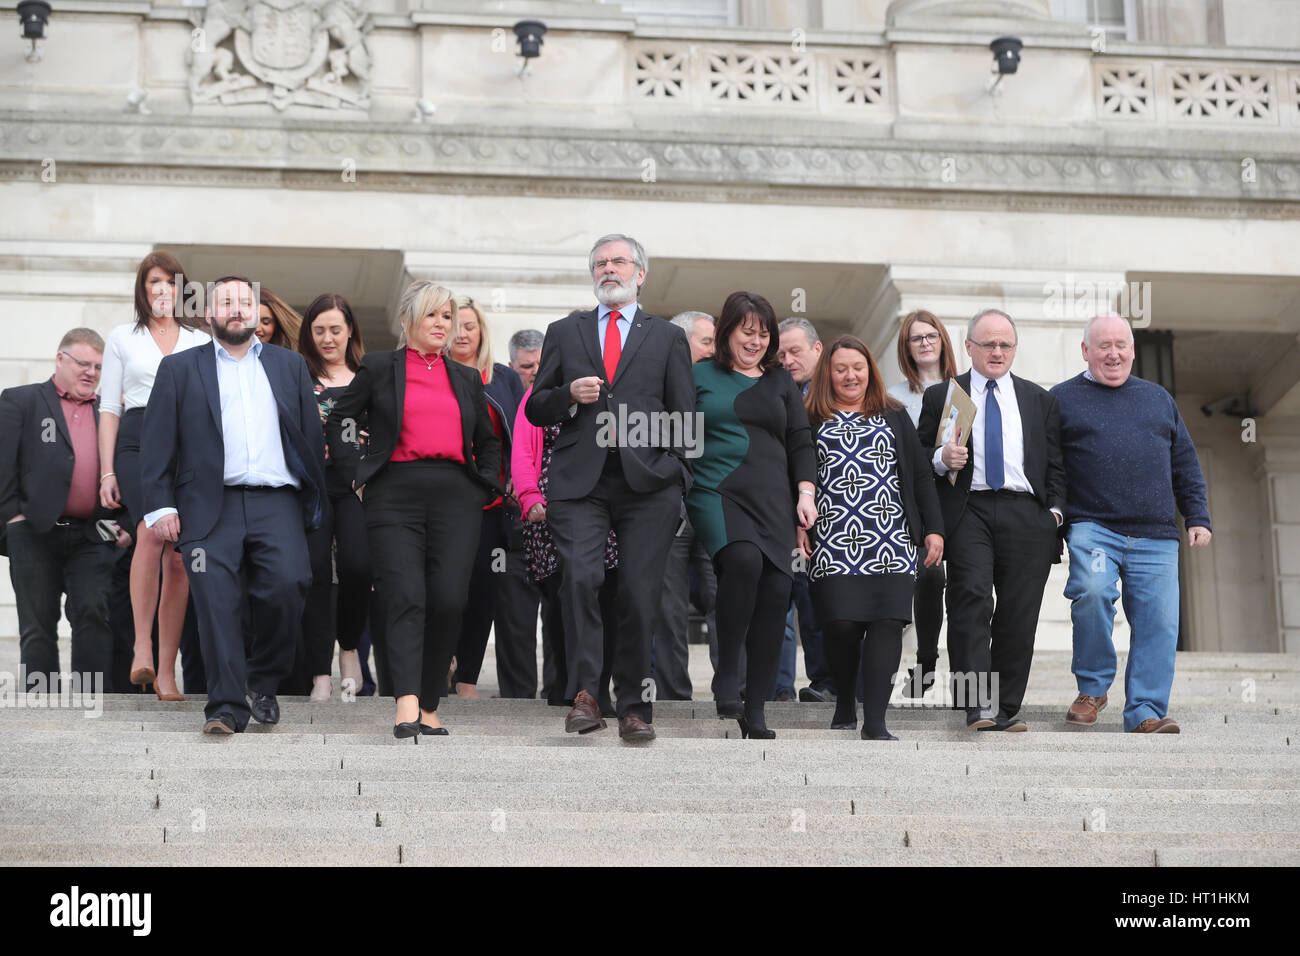 Sinn Fein's Michelle O'Neill, Gerry Adams and Michelle Gildernew with Assembly members outside Stormont as party chiefs will meet Northern Ireland Secretary James Brokenshire later for preliminary talks on finding a way to restore devolution. Stock Photo